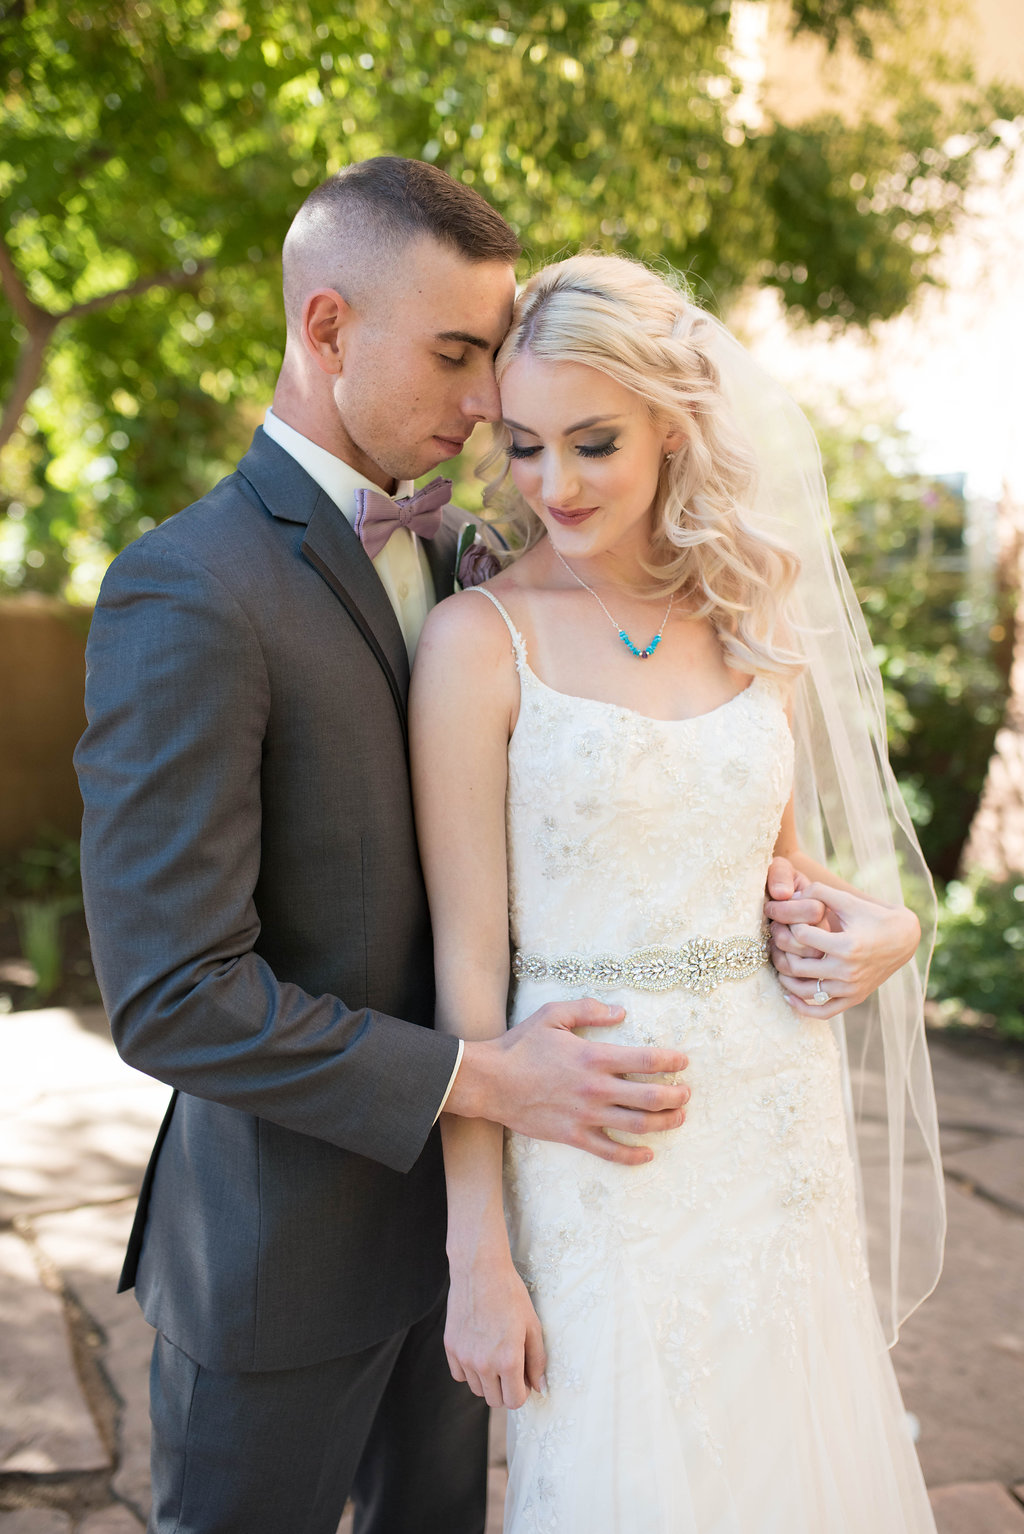 Perfect Wedding Guide New Mexico Albuquerque Santa Fe planning design inspo inspiration photography local marriage love engagement ceremony wedding couple outdoor natural light romantic love ceremony hair makeup tux beauty menswear bowtie